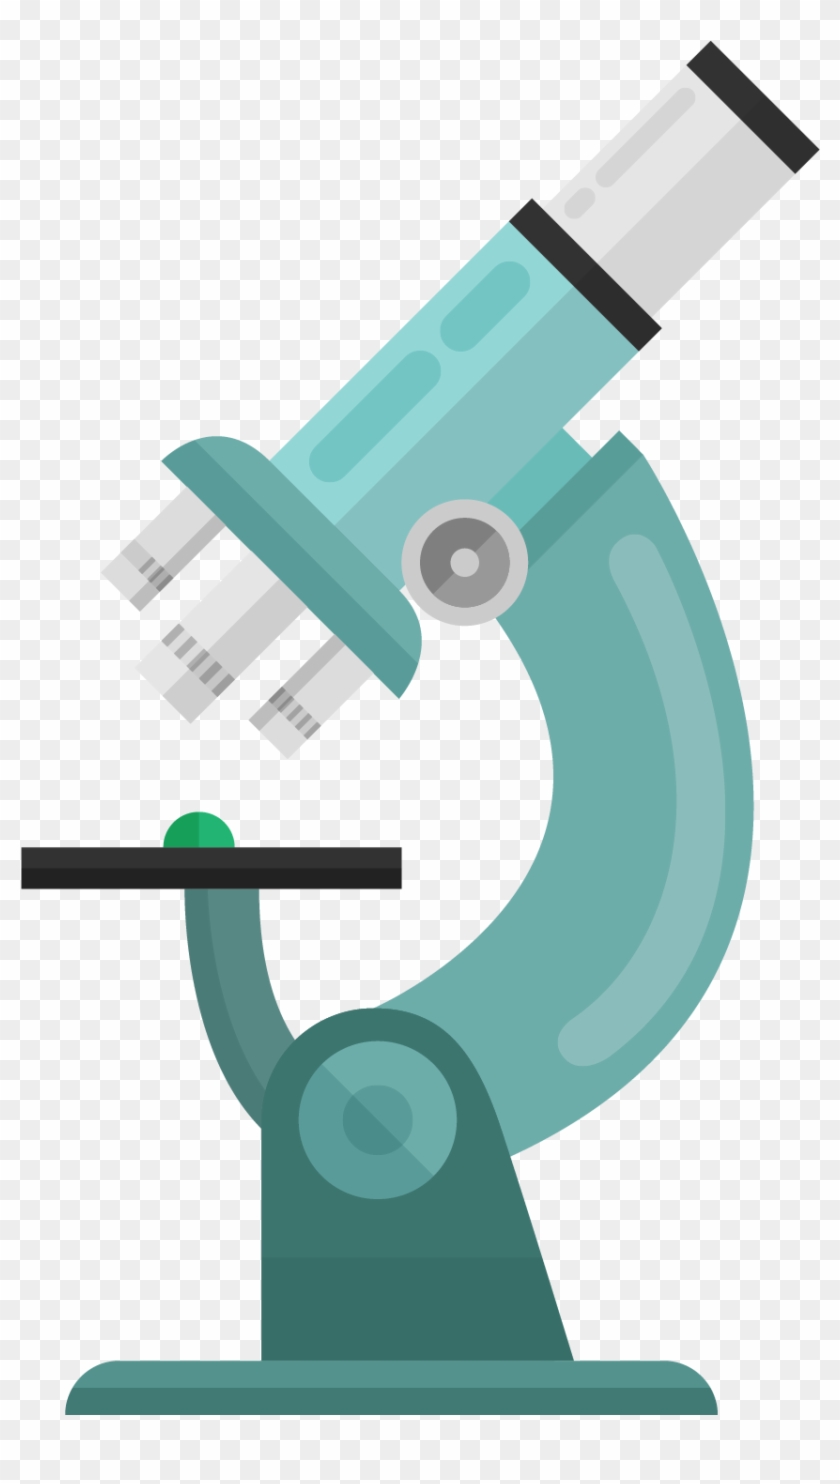 Microscope Image Processing - Microscope Vector Png #1297516